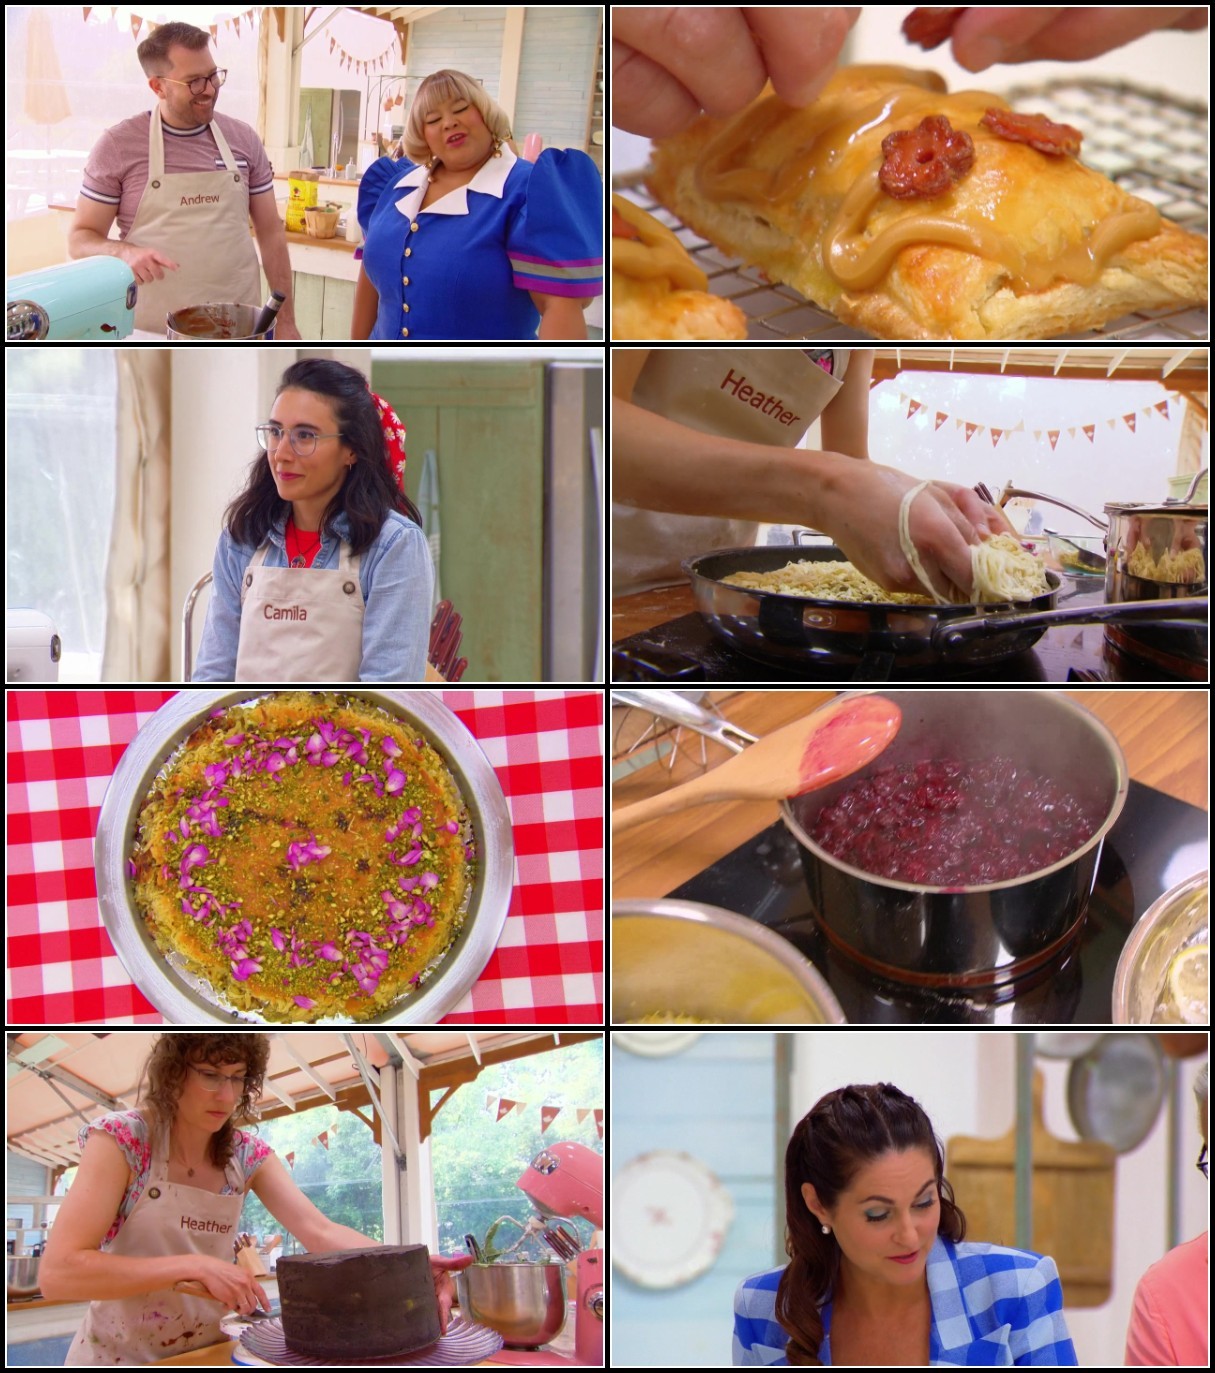 The Great Canadian Baking Show S07E05 720p WEBRip x264-BAE